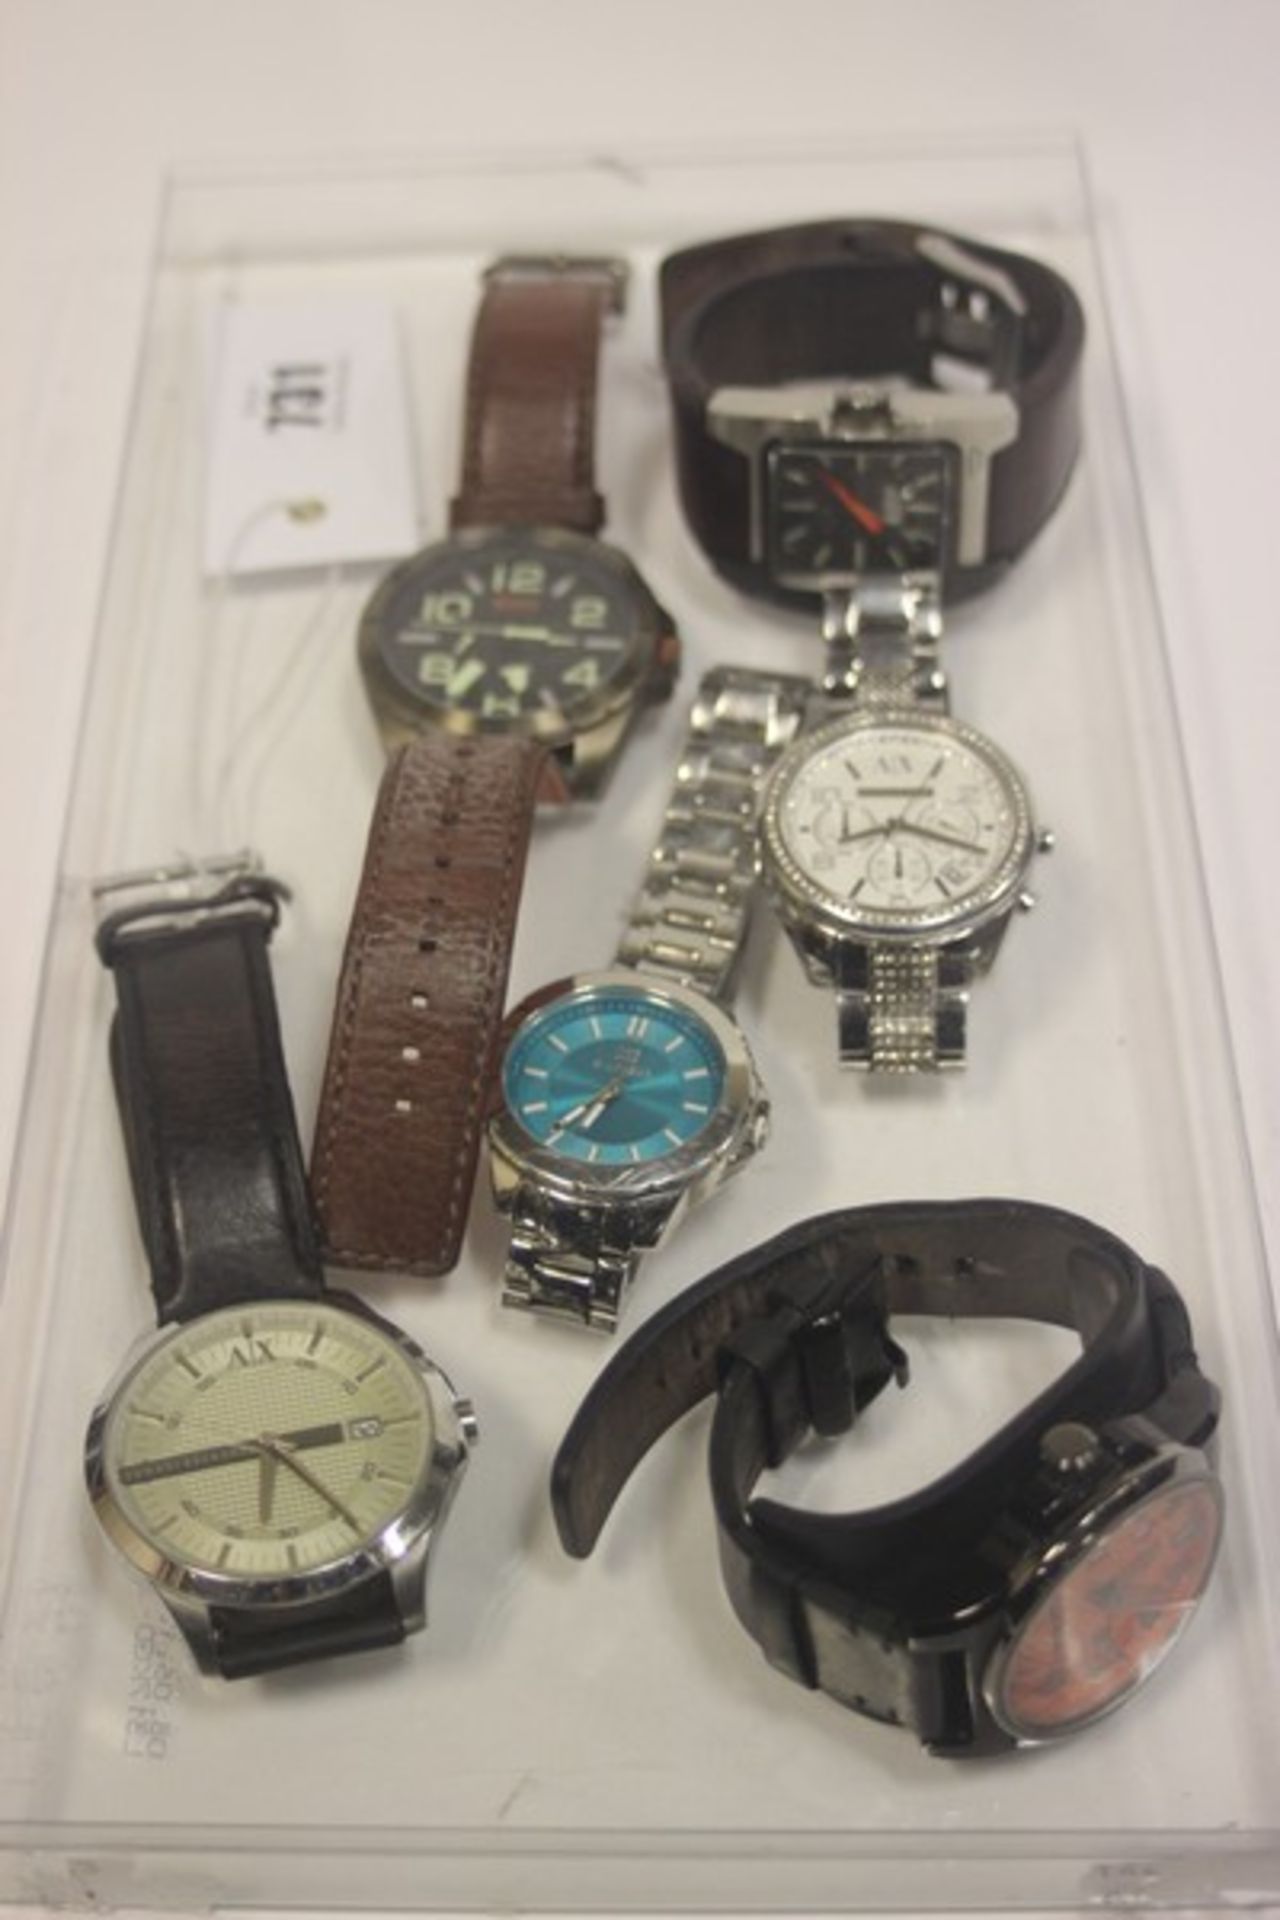 Six designer watches to include; Boss, Police, Armani Exchange.